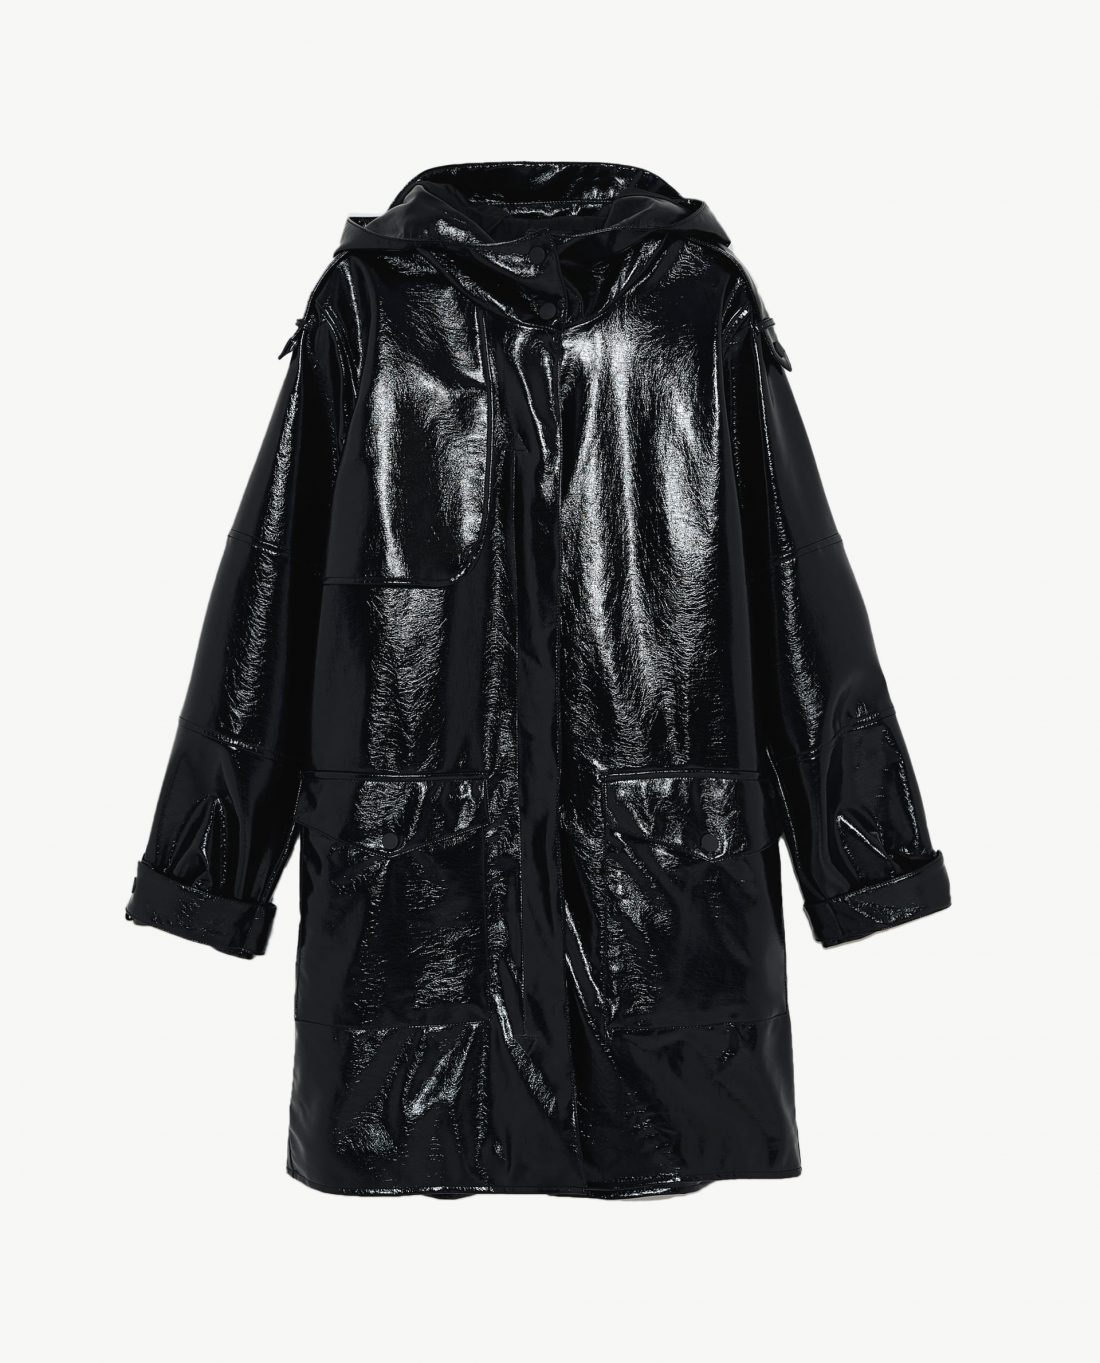 Six trendiest raincoats to see you through Spring 